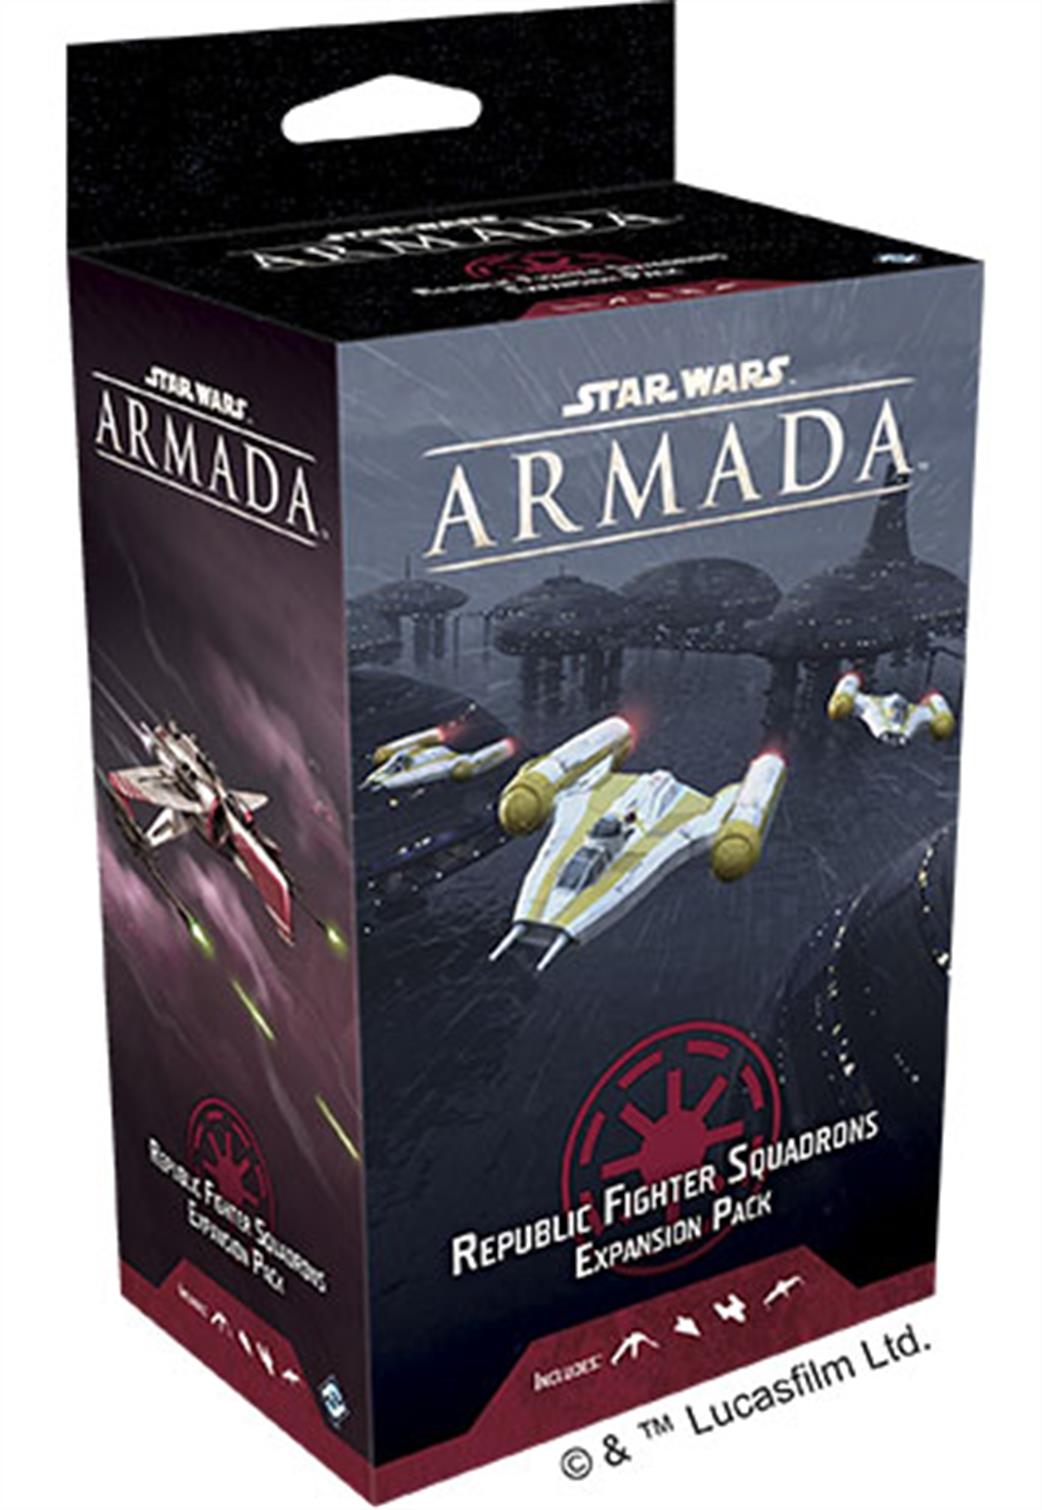 Fantasy Flight Games SWM36 Republic Fighter Squadrons Expansion for Star Wars Armada Game